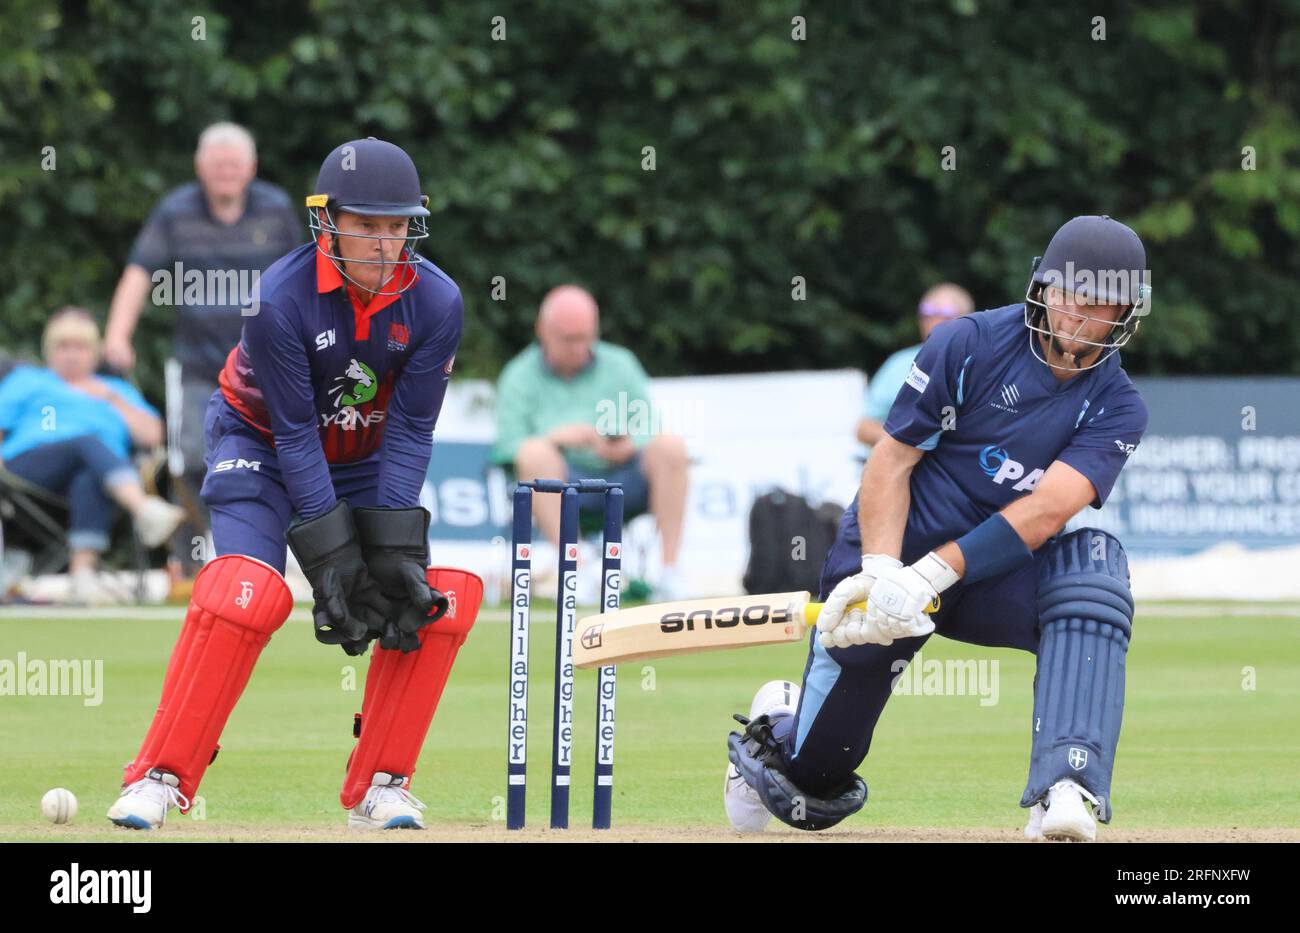 Stormont, Belfast, Northern Ireland, UK. 04 Aug 2023. The Gallagher Challenge Cup Final – Carrickfergus v Waringstown (red). Waringstown won the final by 36 runs. Waringstown 354-4 Carrickfergus 318. Carrickfergus player Jake Egan made 87 in the final. Credit: David Hunter/Alamy Live New Stock Photo